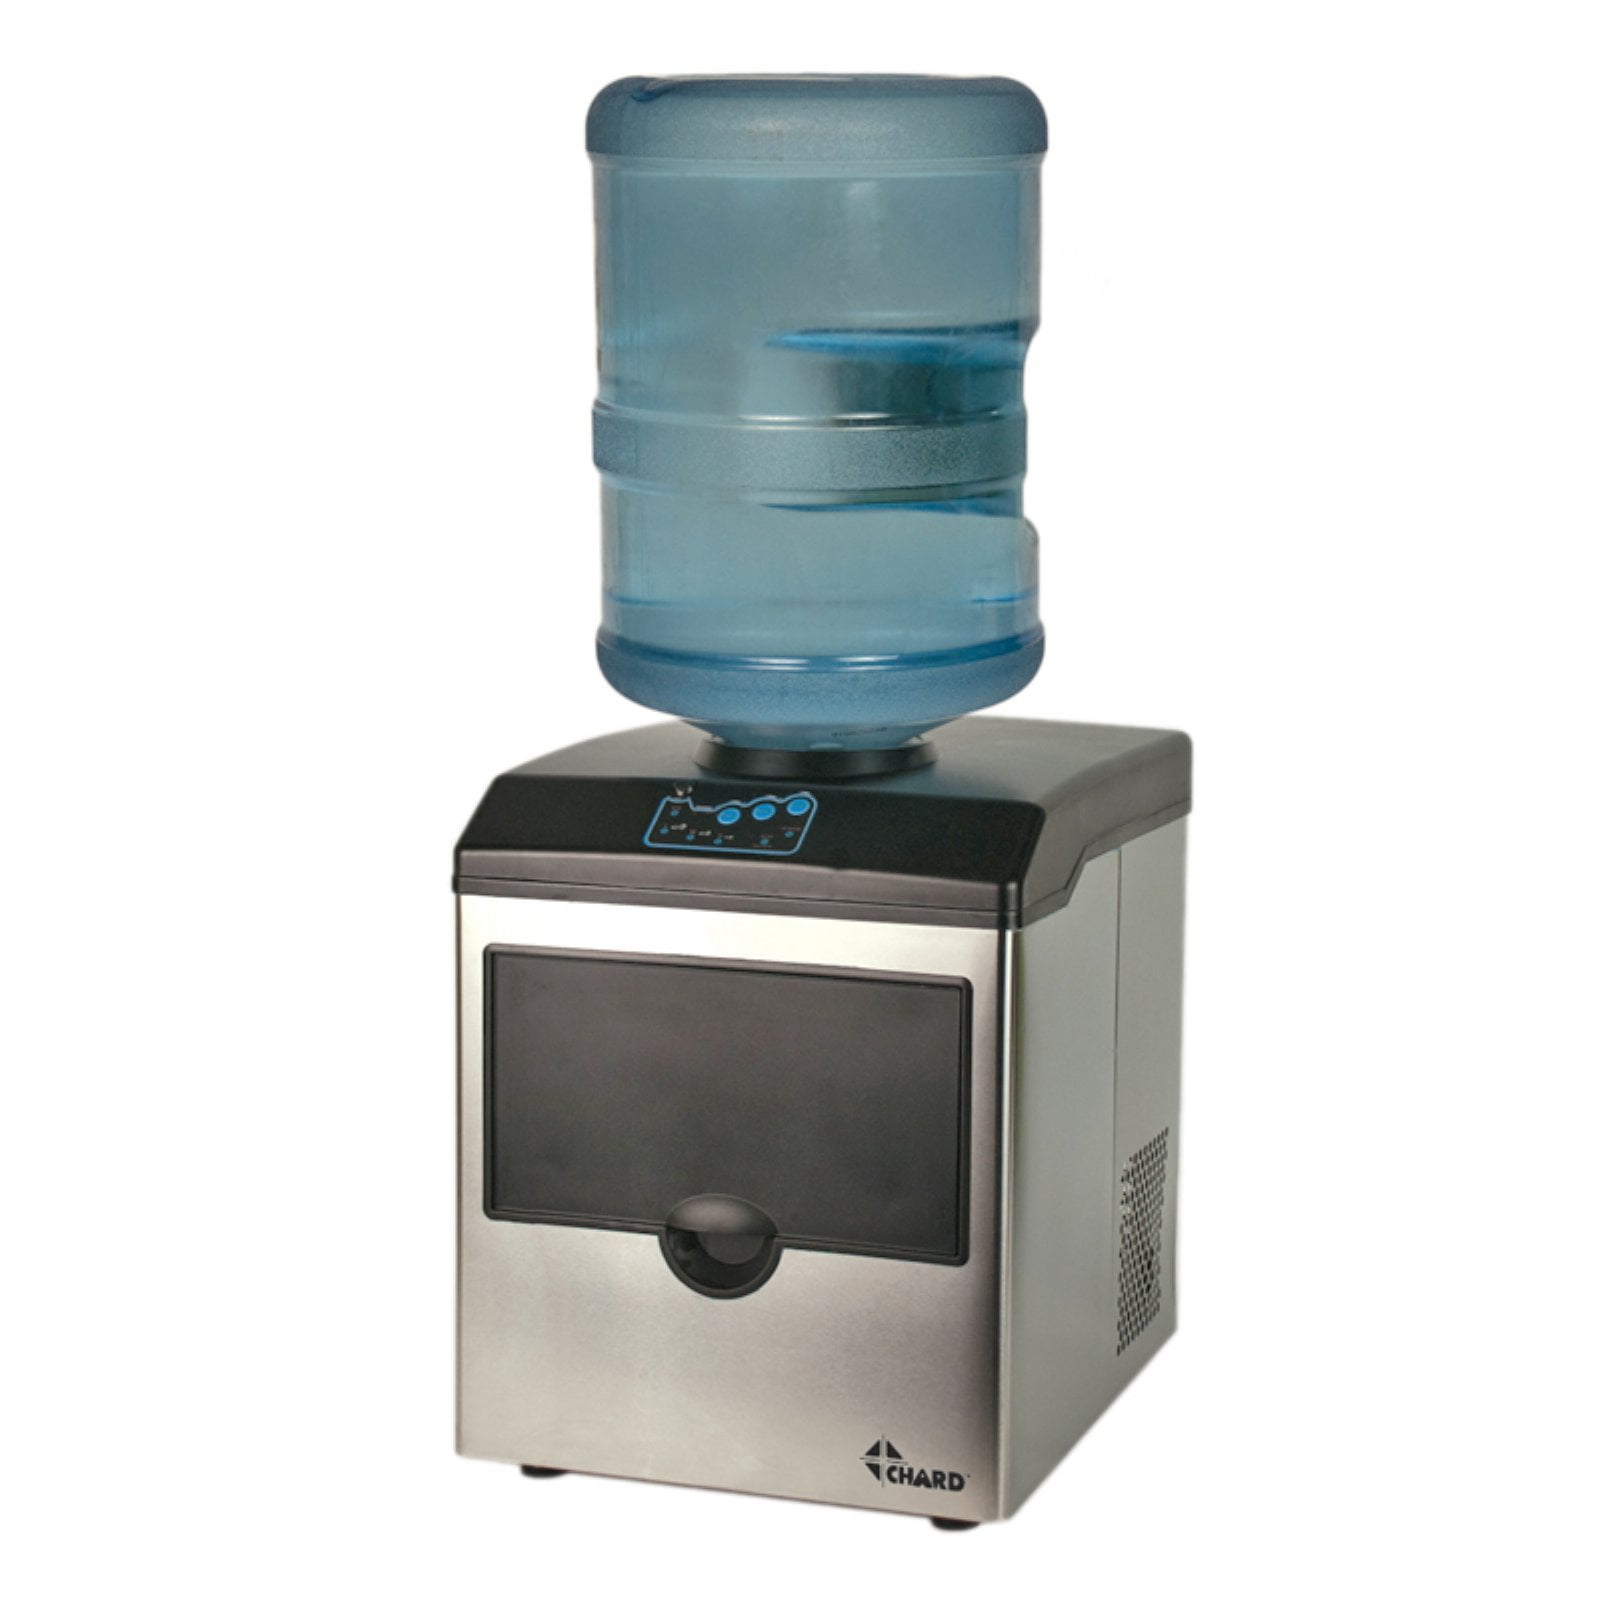 Chard Stainless Steel Ice Maker With Water Dispenser - Walmart.com Chard Stainless Steel Ice Maker